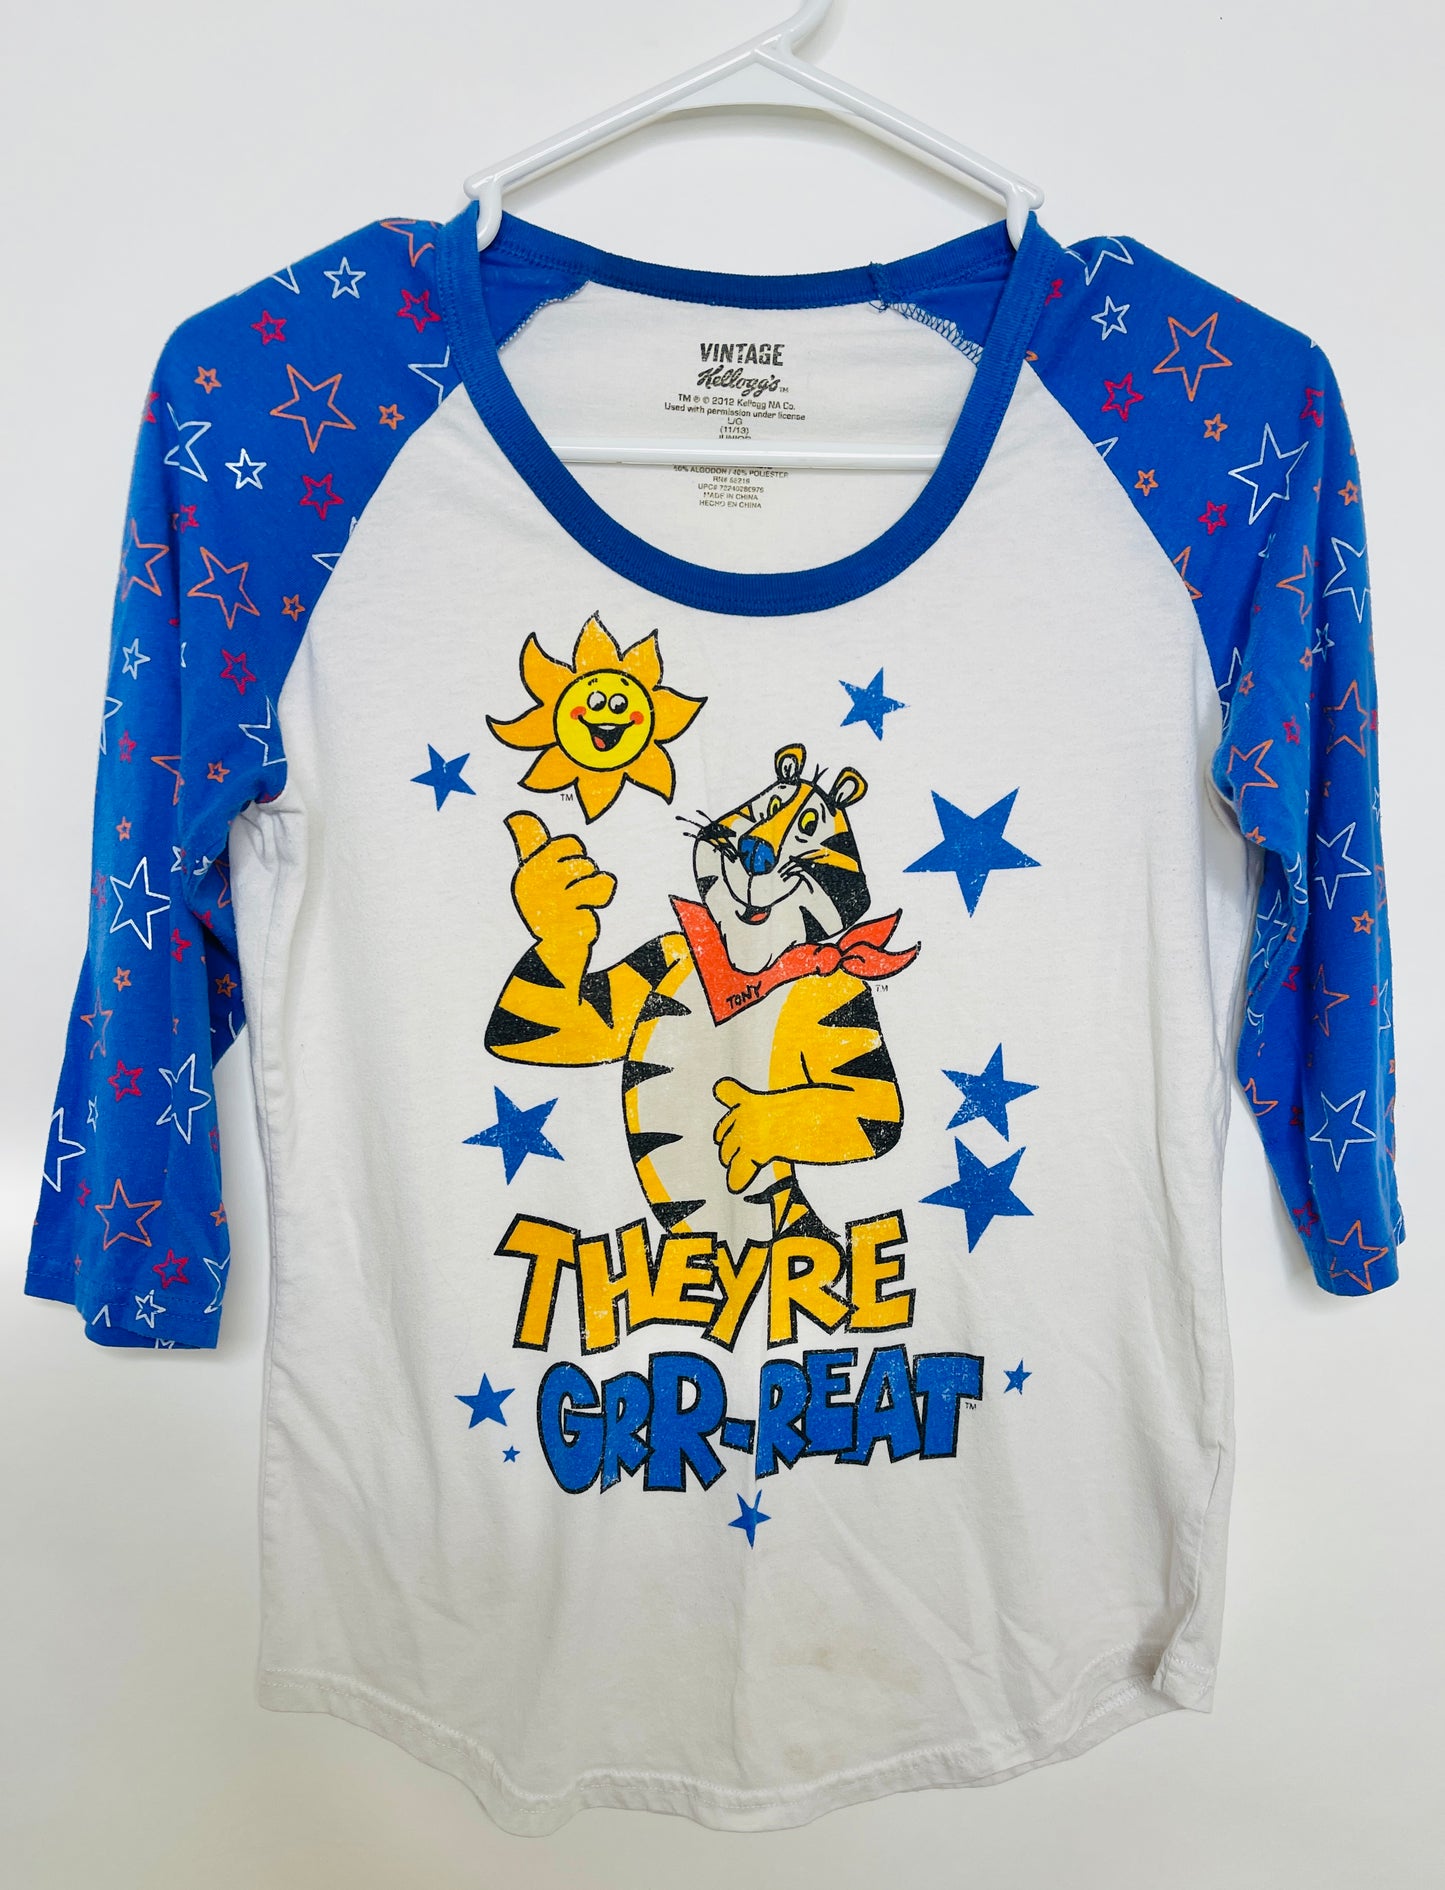 Tony the Tiger "They're Grr-reat" Patriotic Tee - Junior L (11/13)